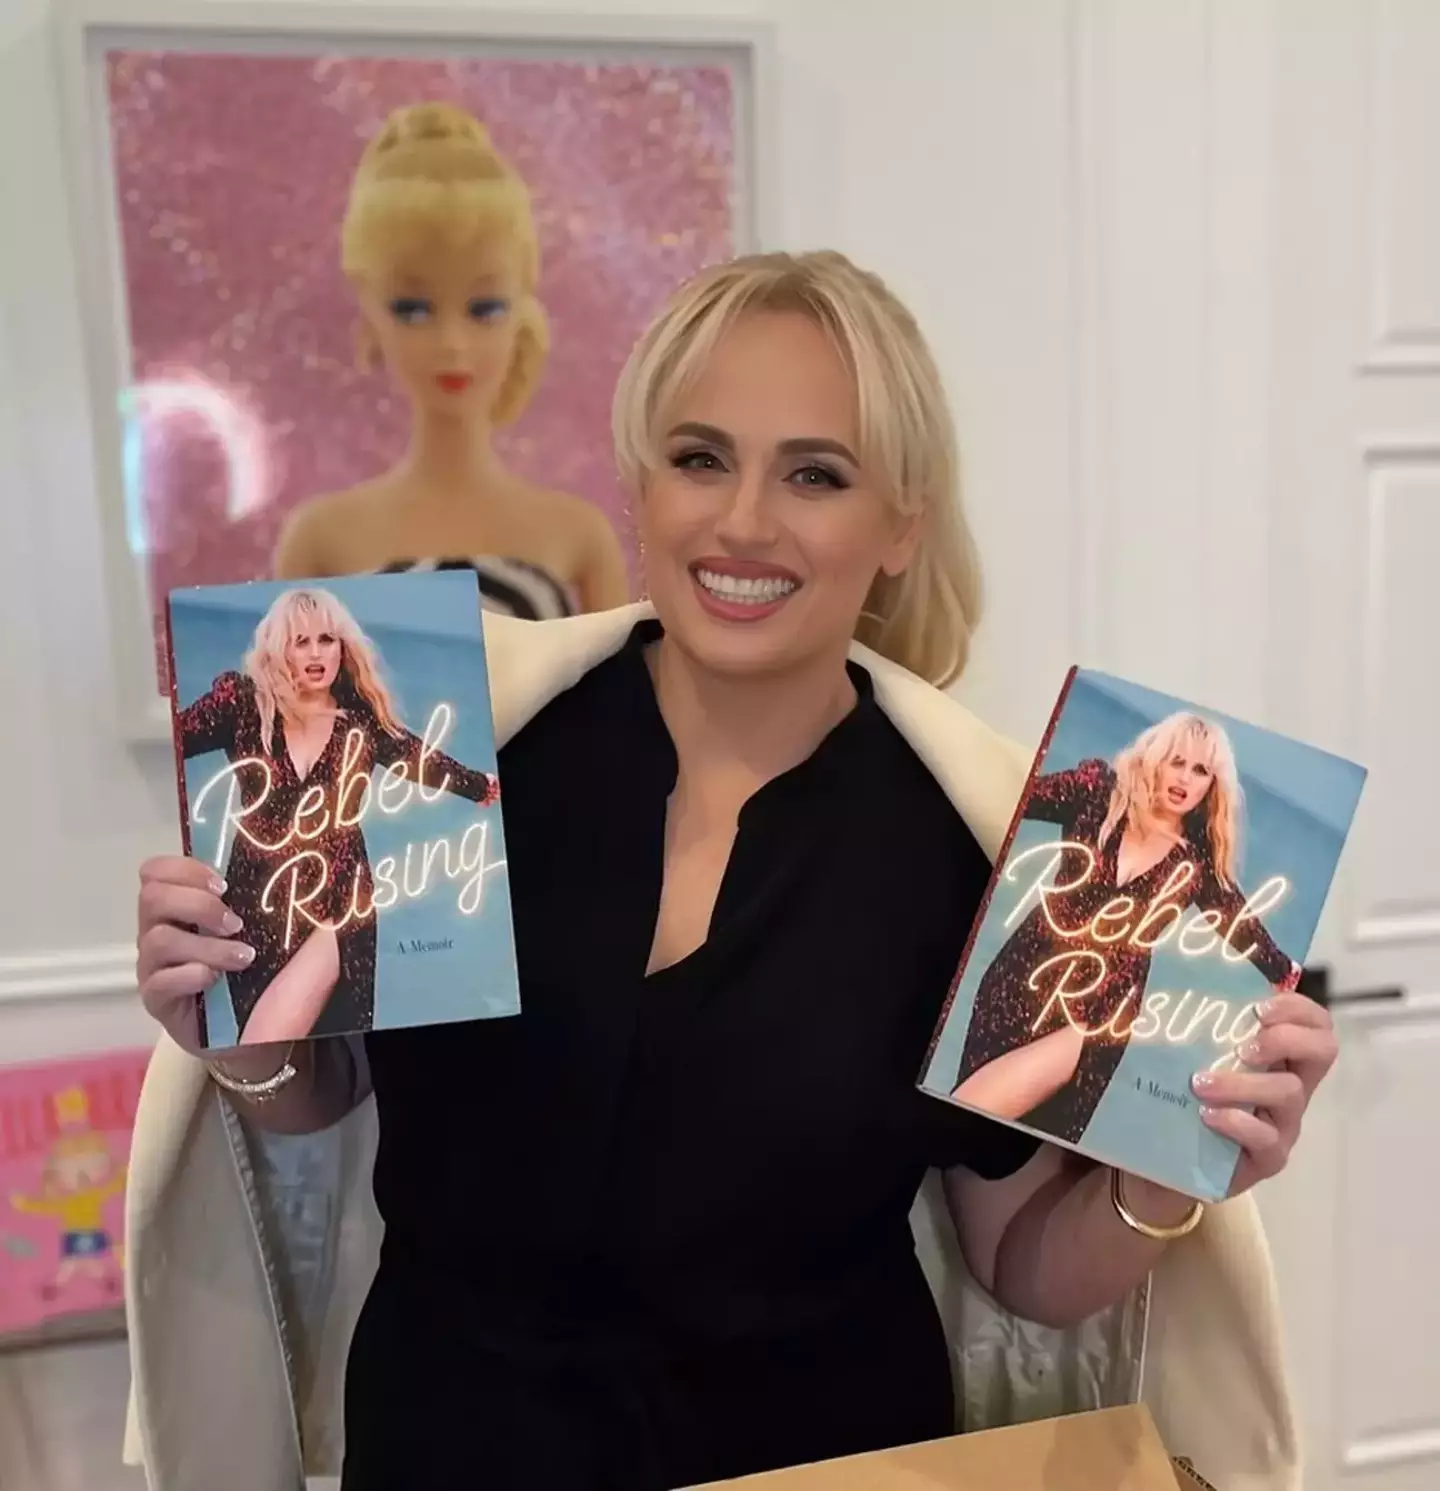 Rebel Wilson said she will spill the tea in chapter 23 of Rebel Rising.